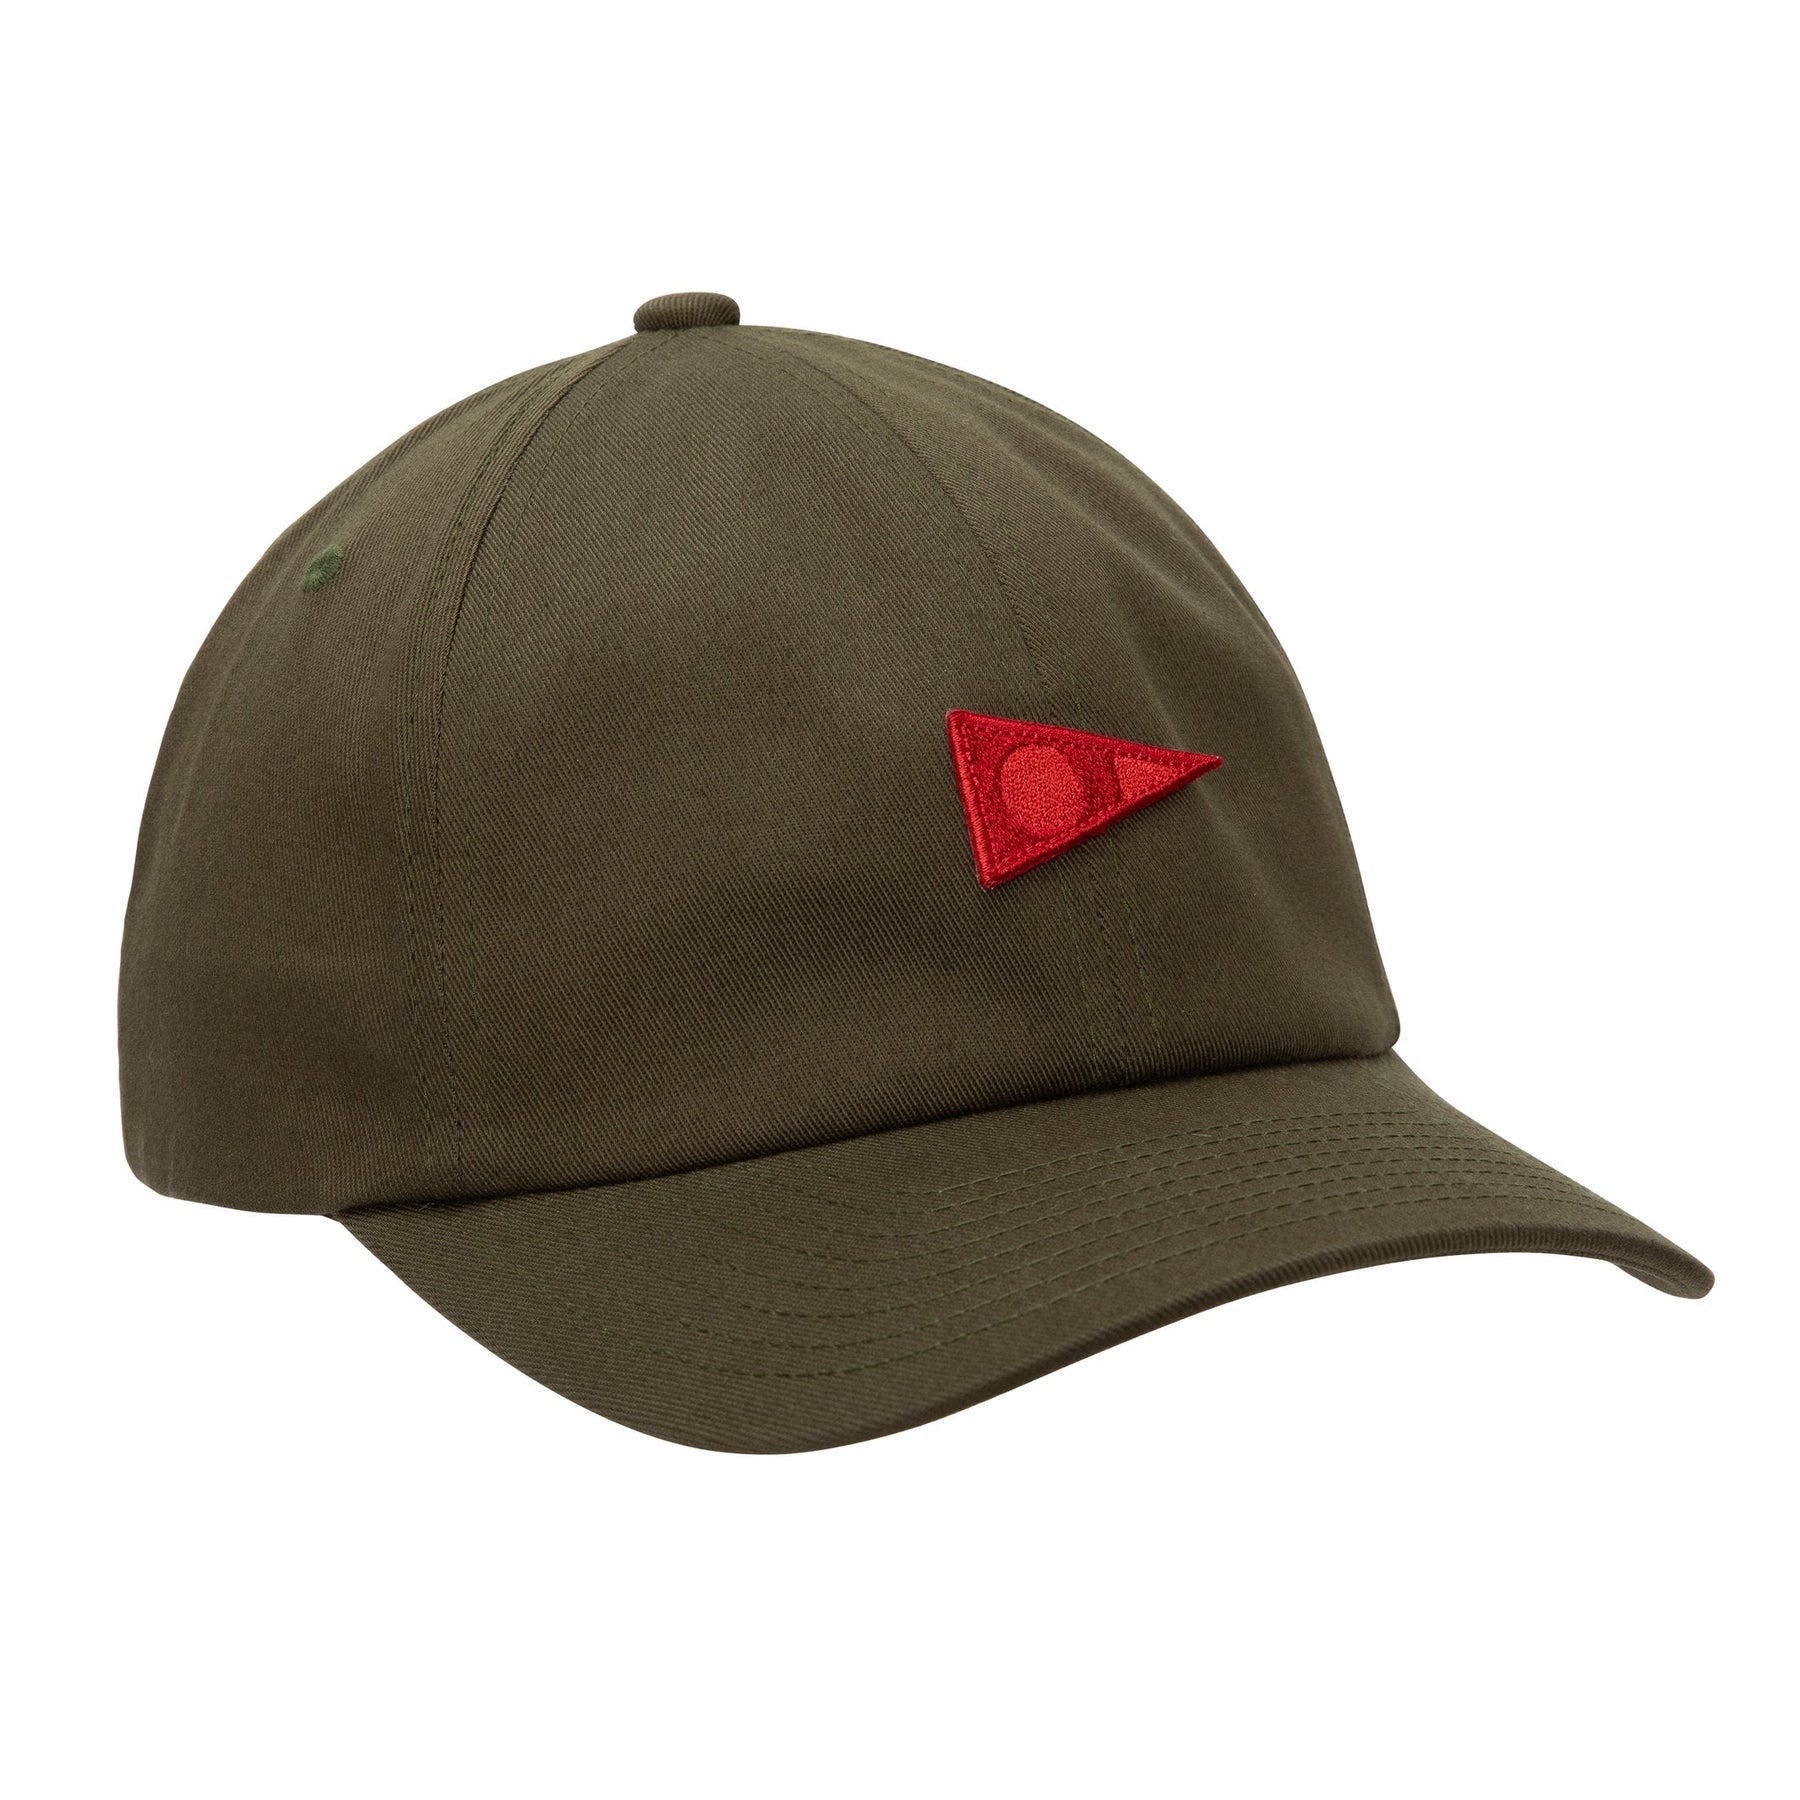 Florence Marine X - Burgee Unstructured Hat / Loden - Board Store Florence Marine Xsun protection  